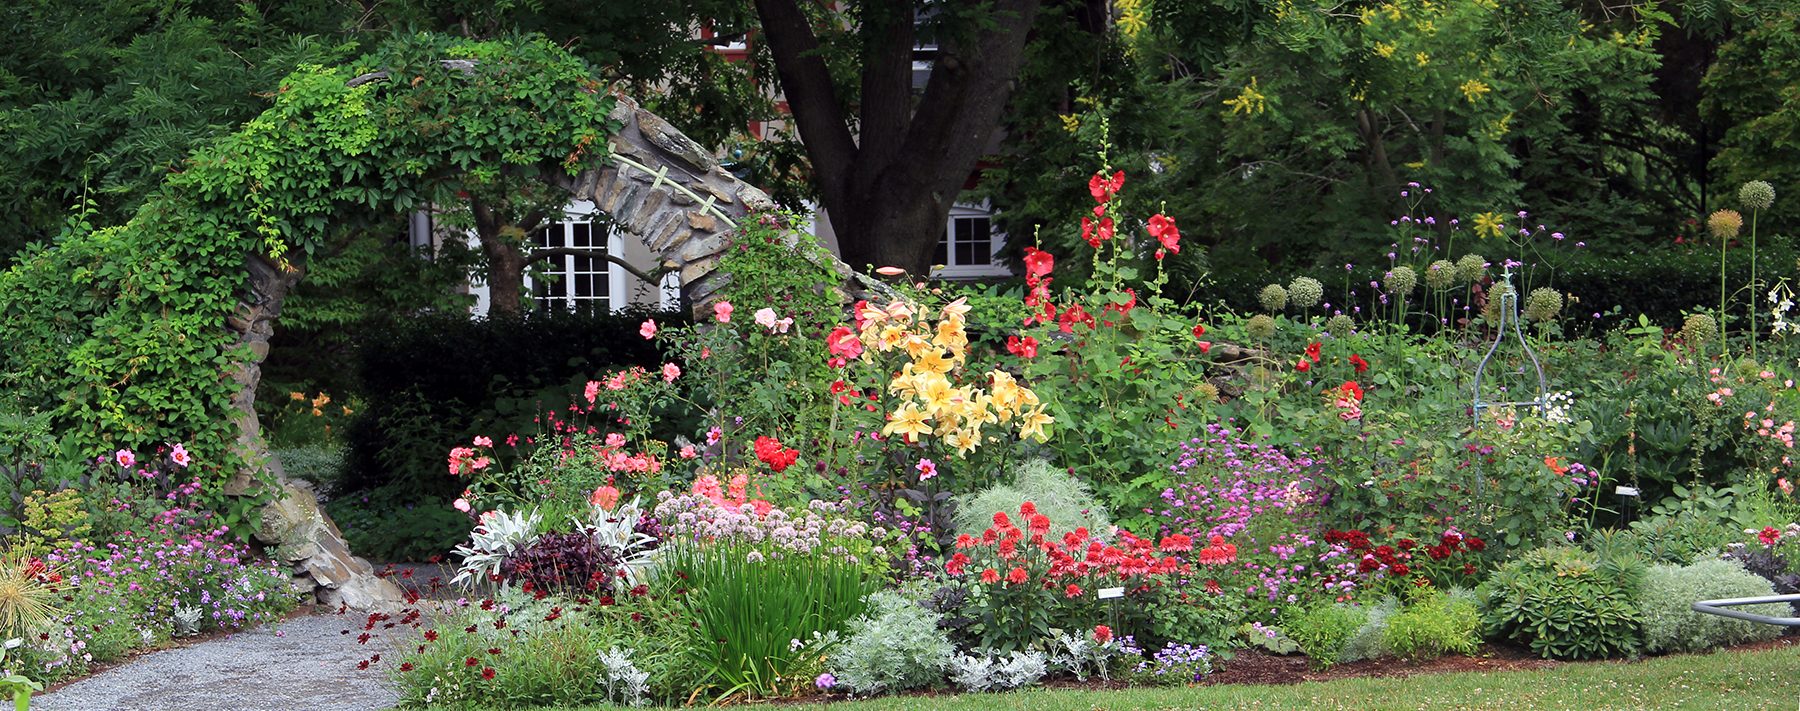 Blithewold, an American Garden Treasure ... Come, and be inspired